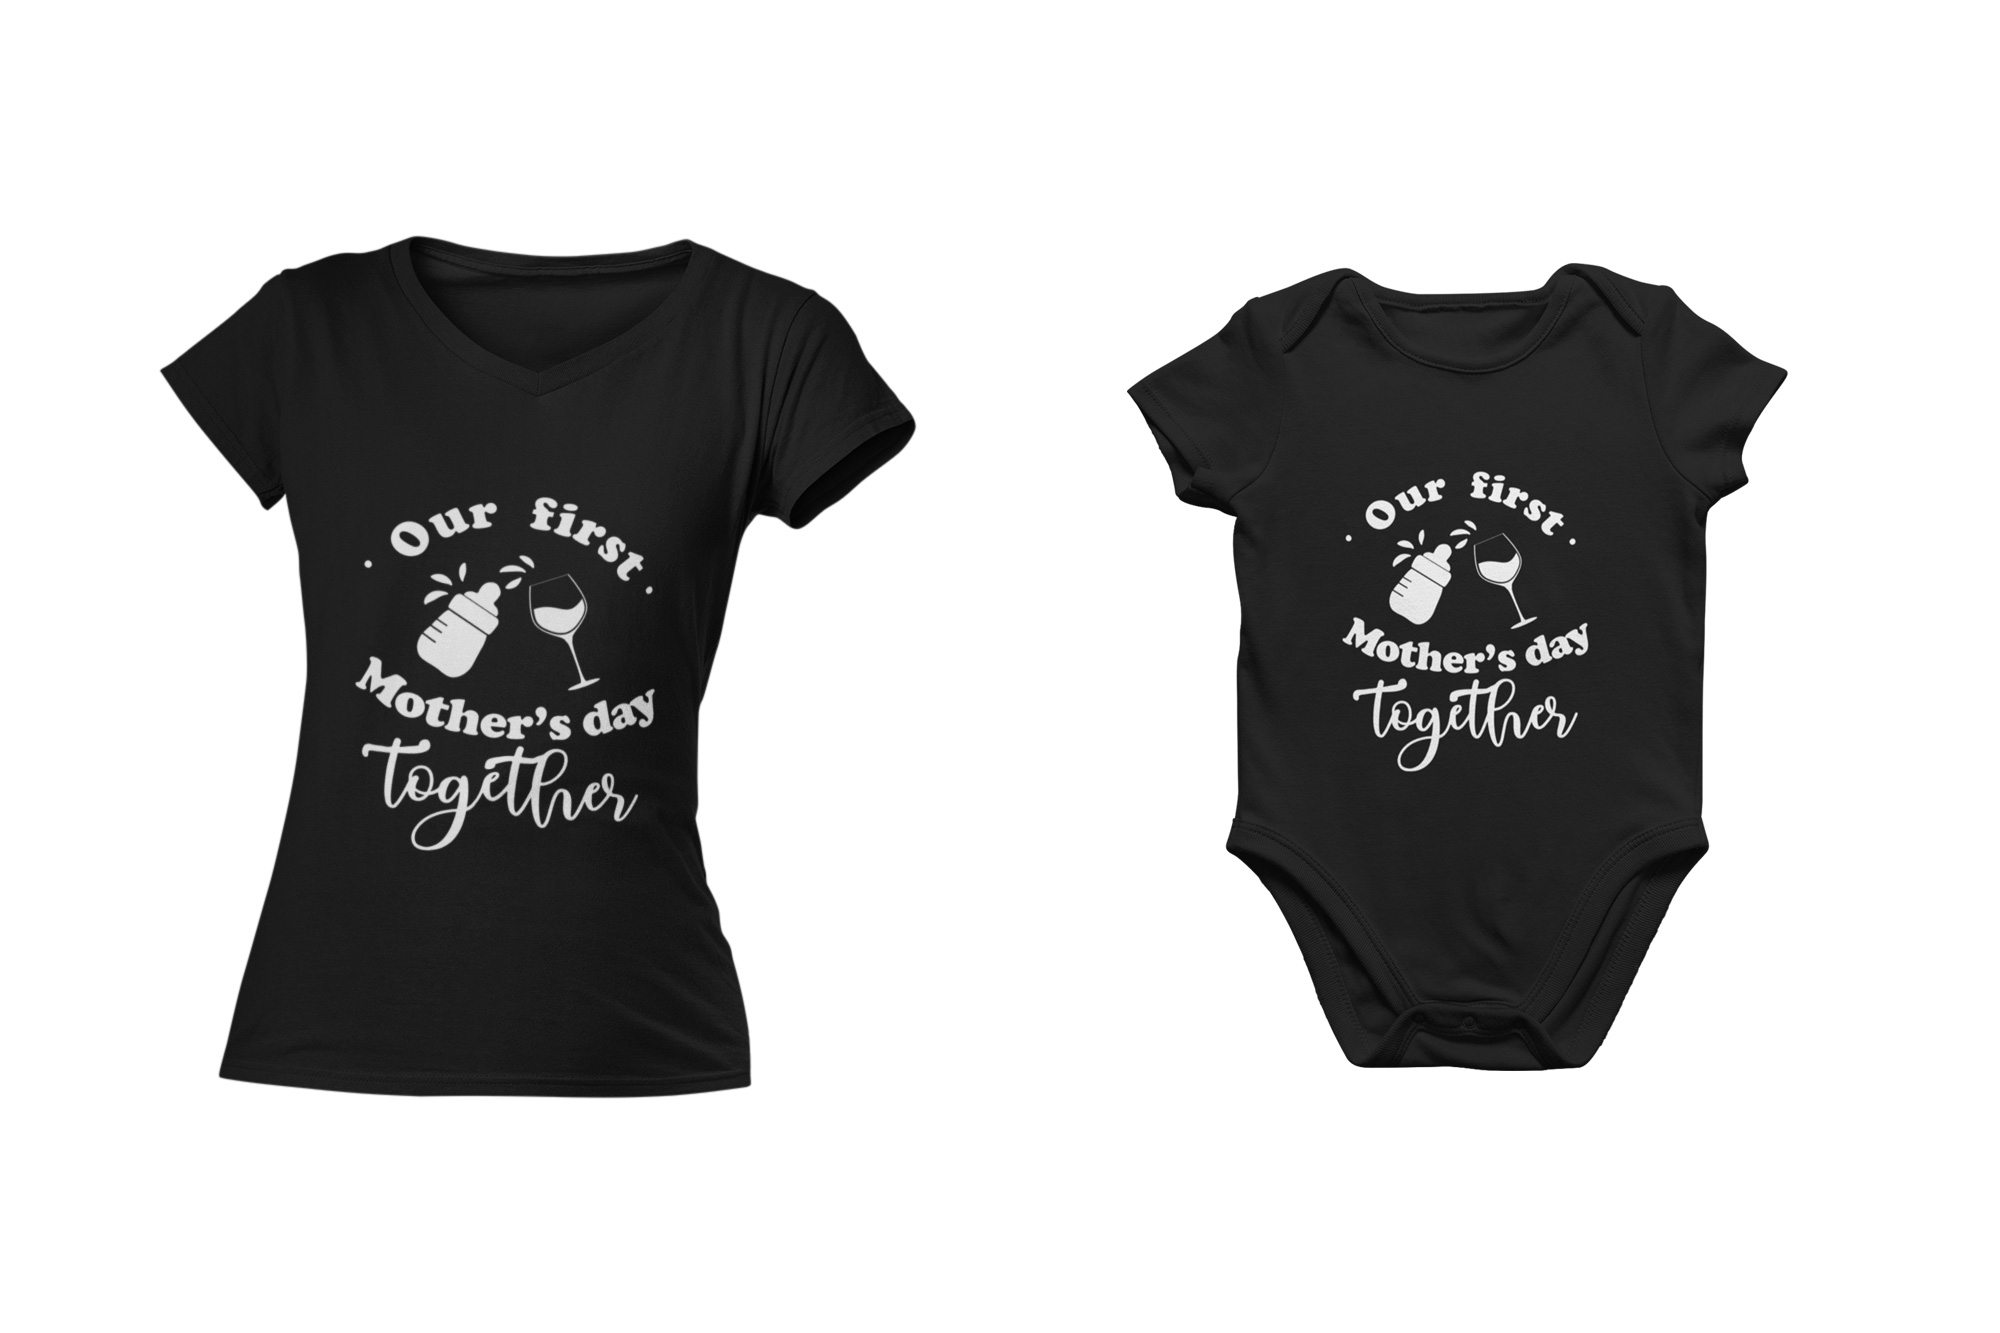 Our First Mother's Day T-shirt and Onesie Set (Black)